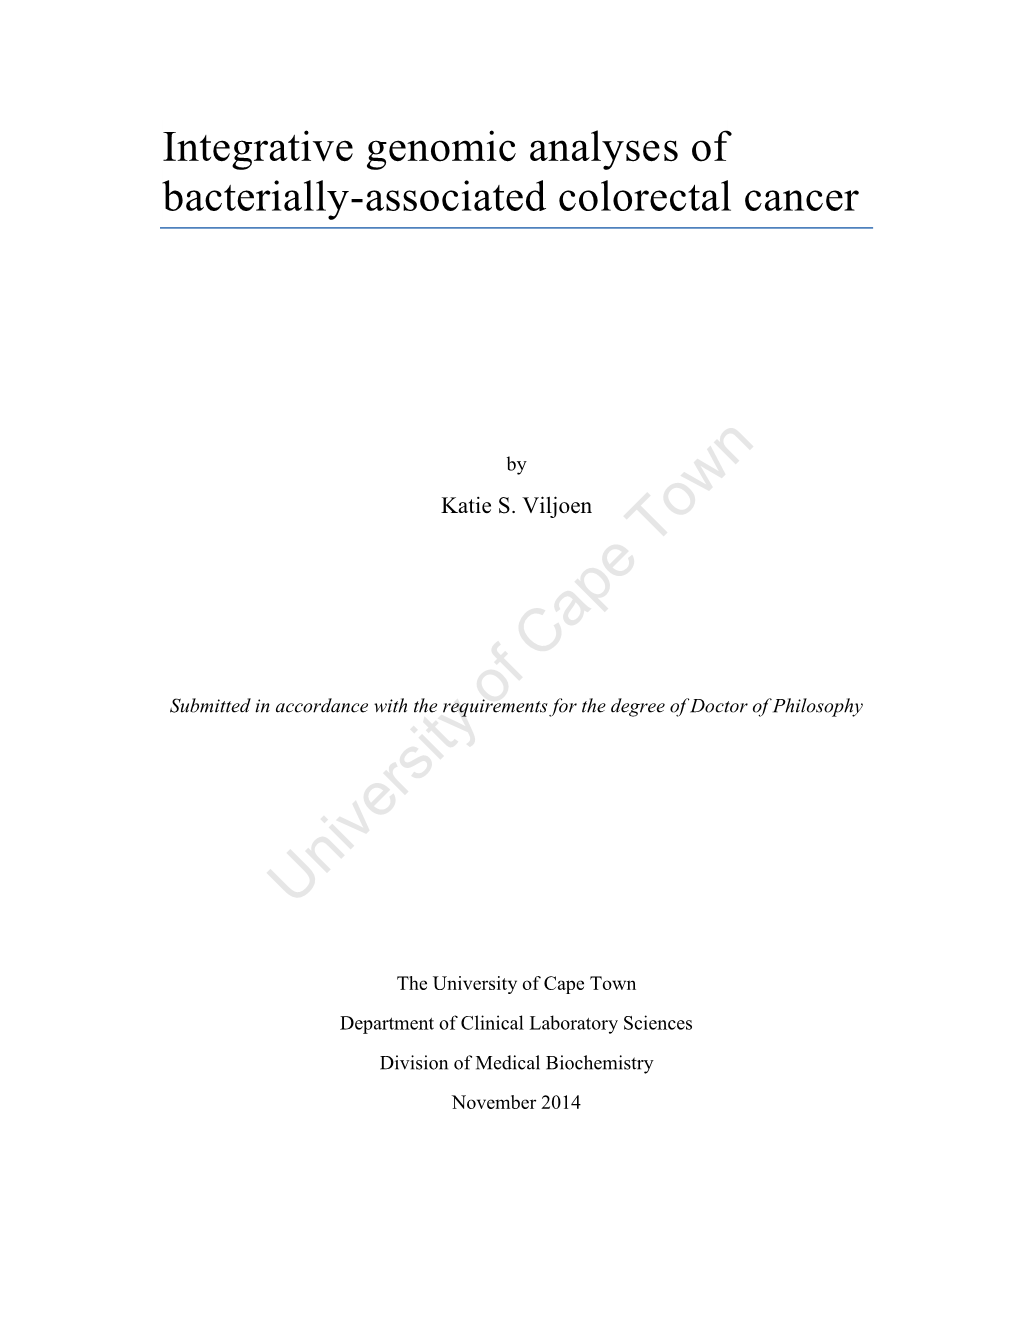 Integrative Genomic Analyses of Bacterially-Associated Colorectal Cancer